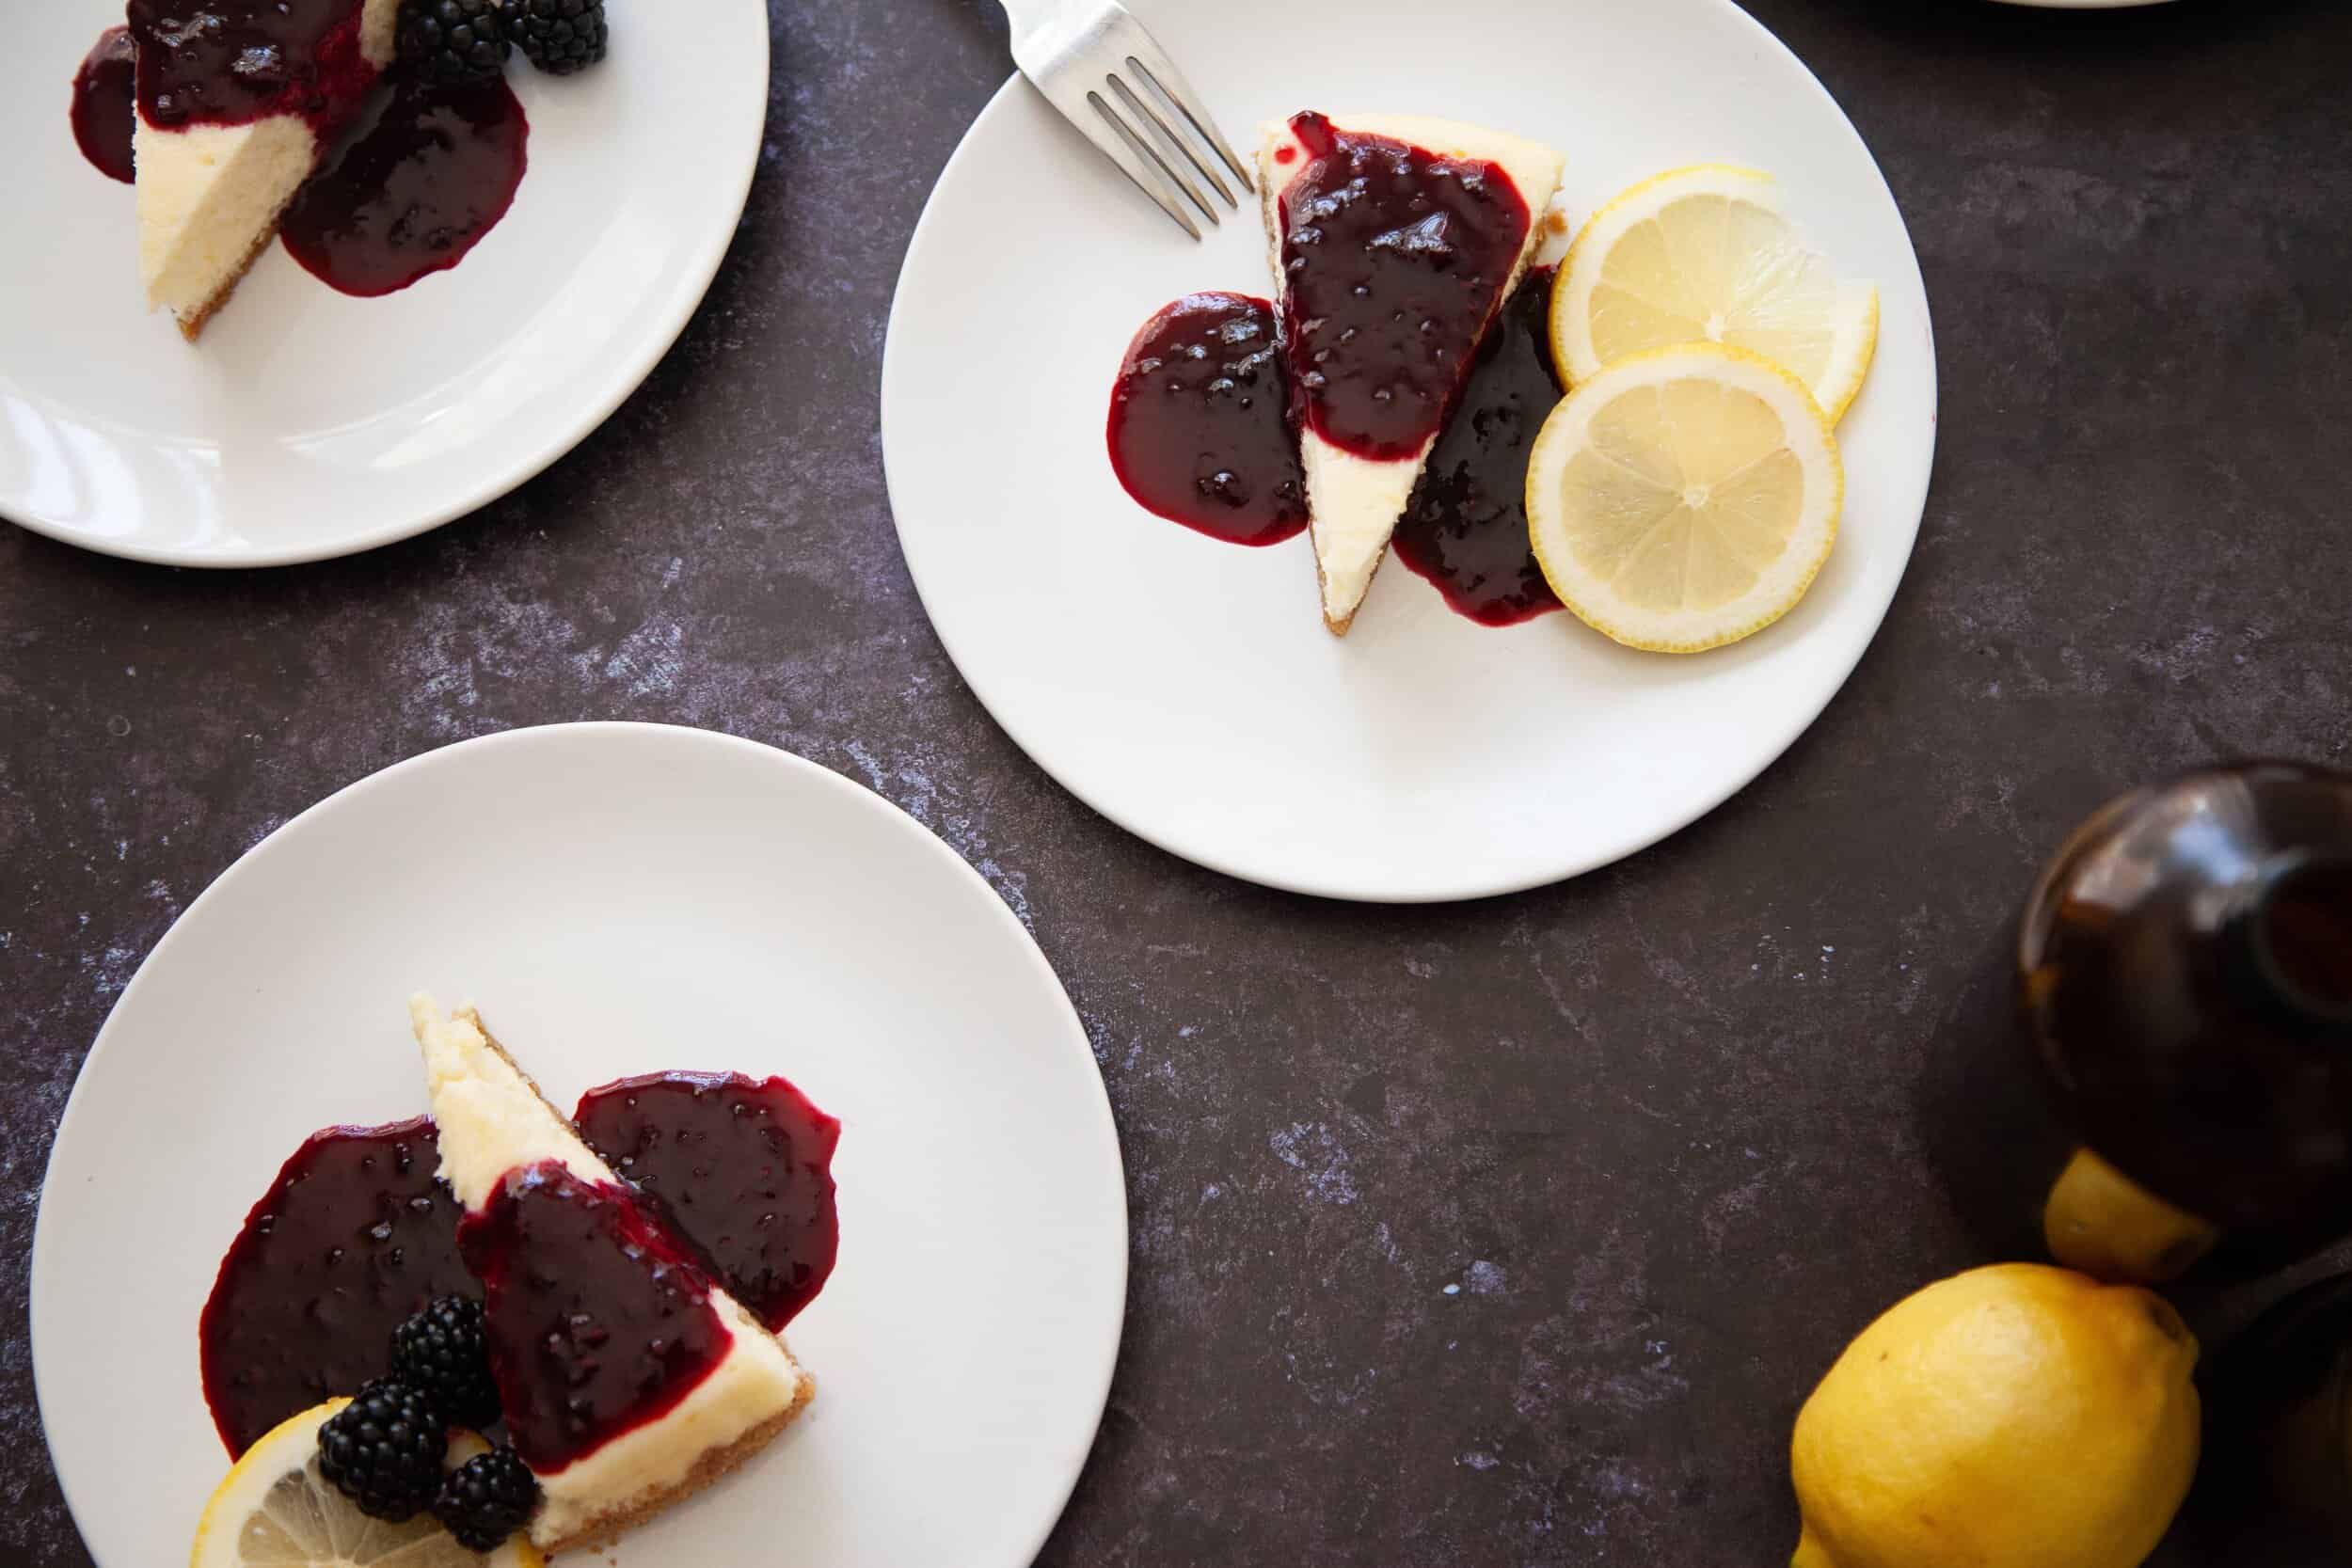 Lemon cheesecake topped with blackberry sauce